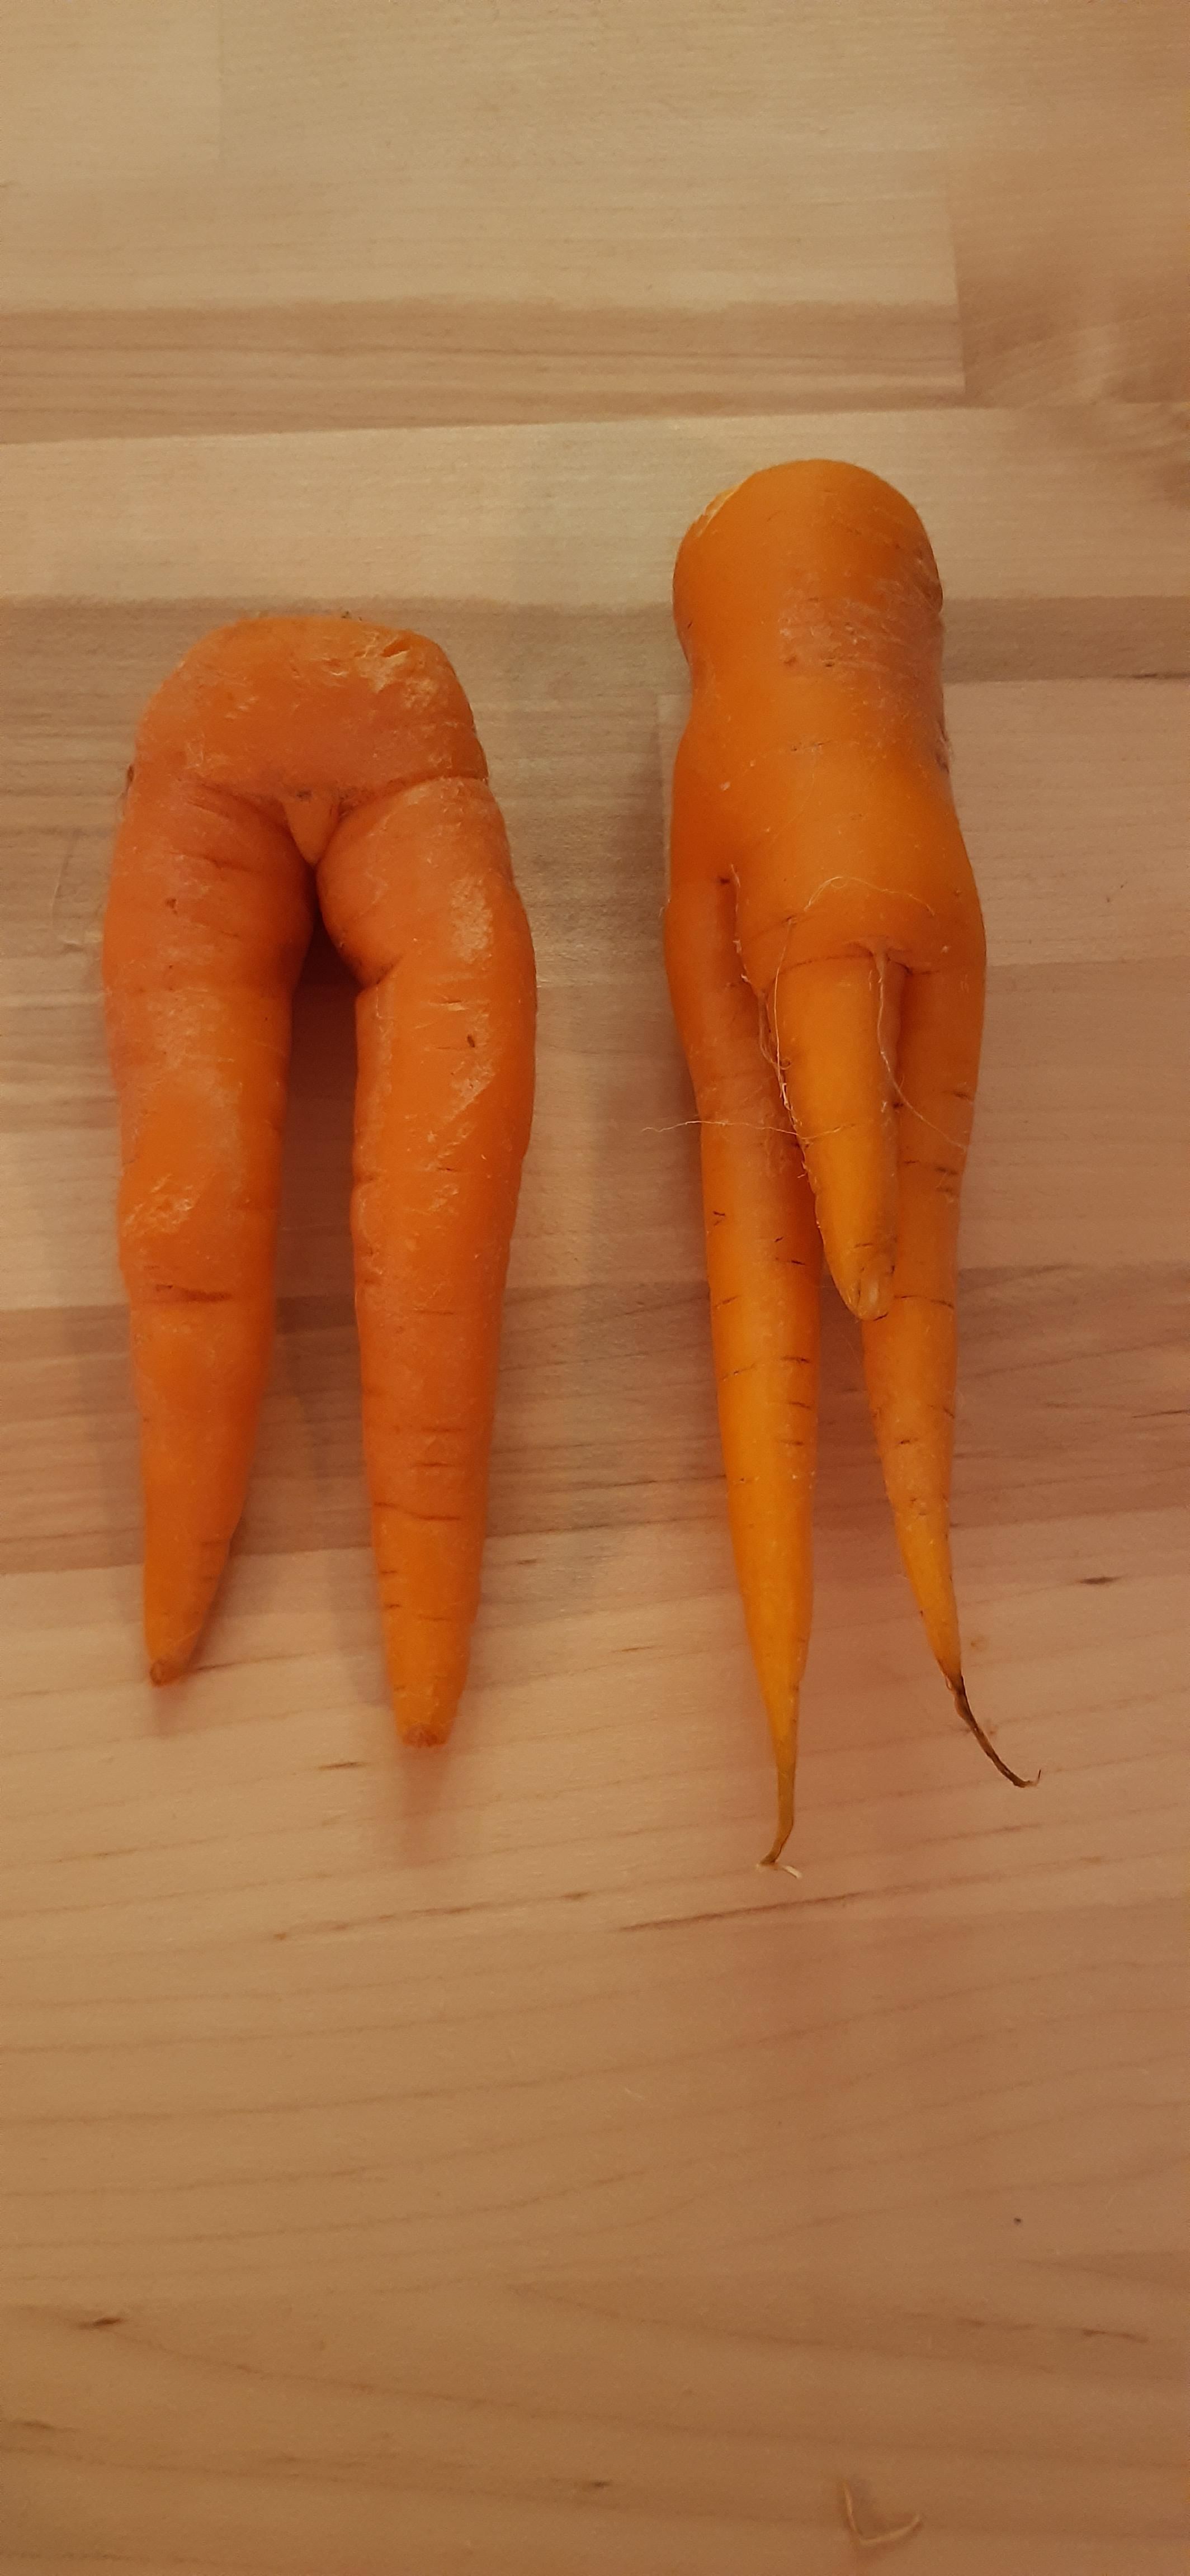 My granddad remained totally poker faced as he passed me these carrots for the stew